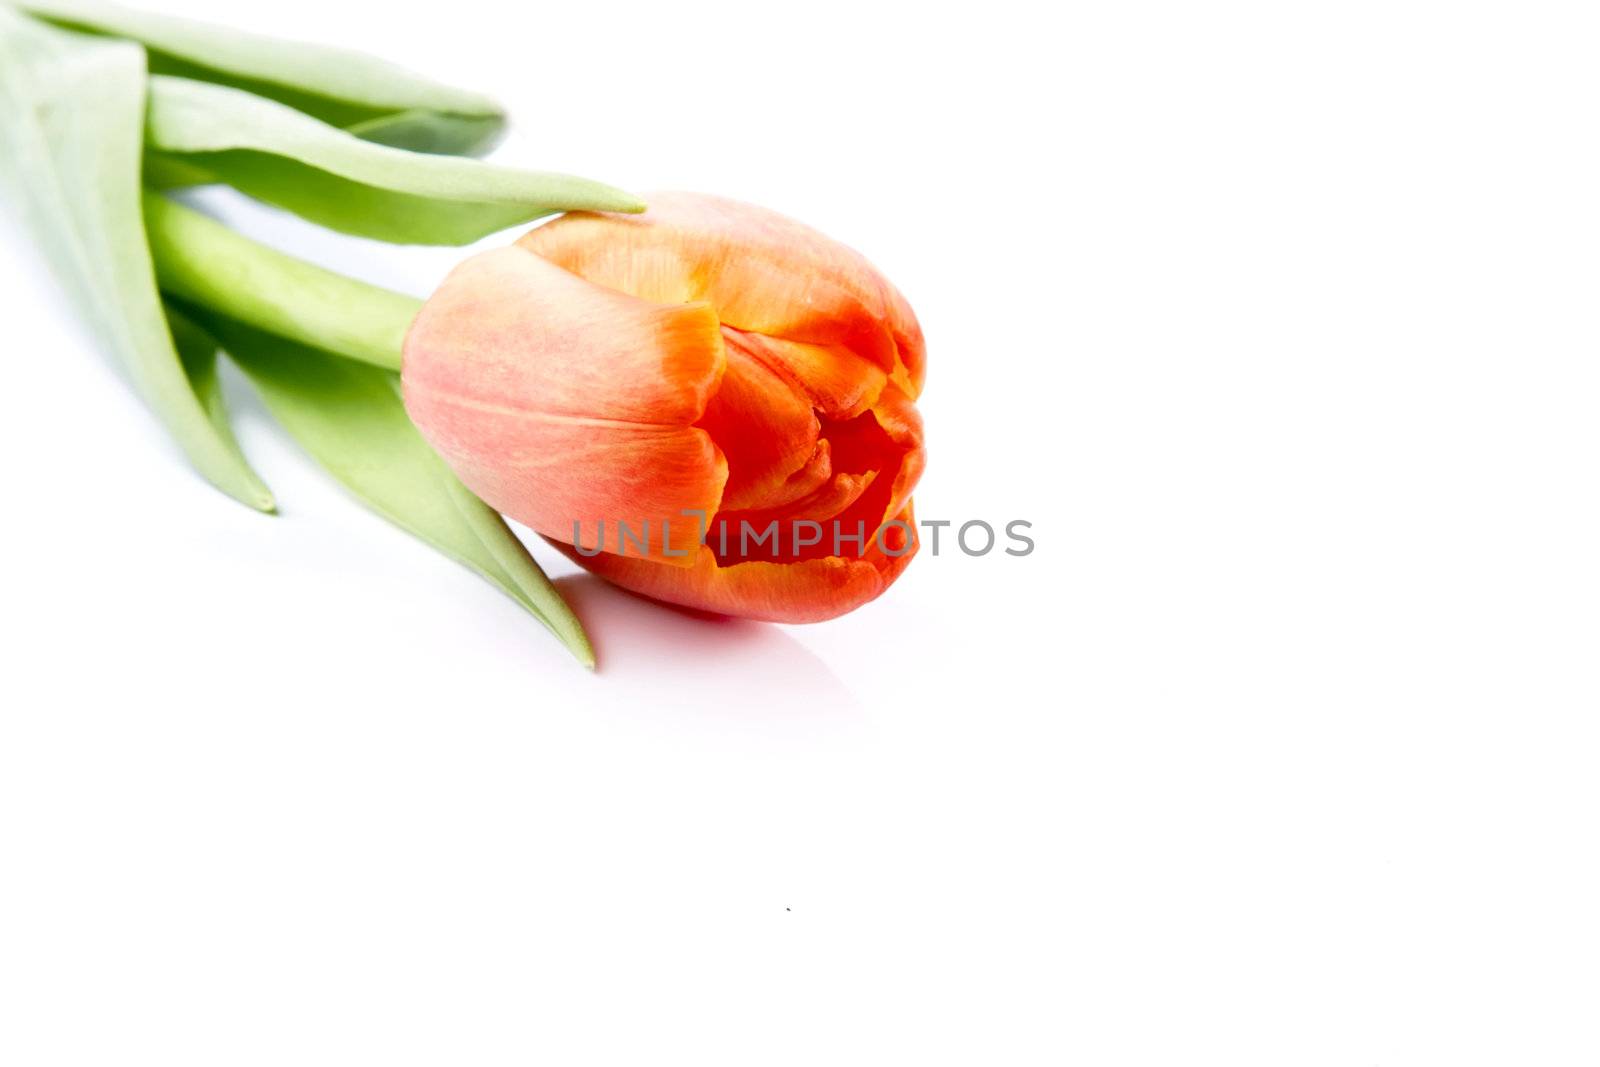 The red tulip lies on a white background